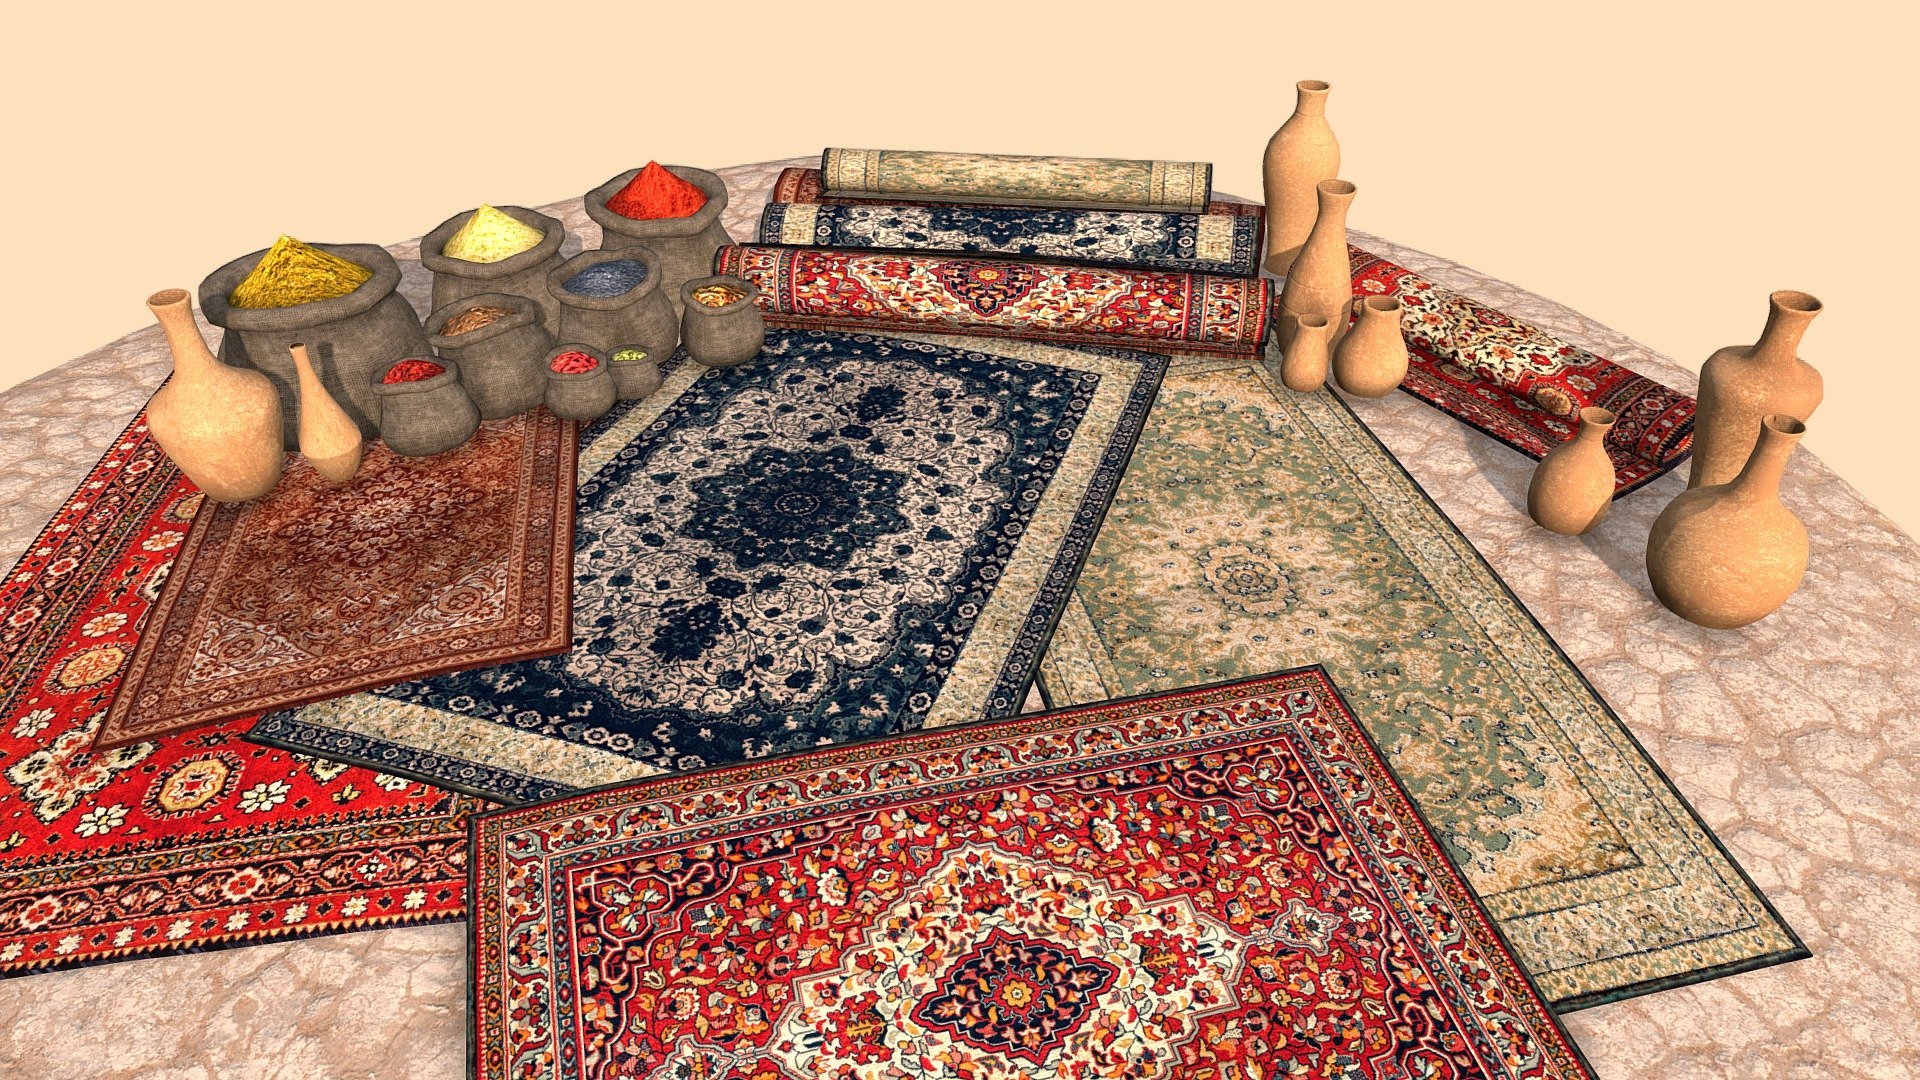 A collection on props for a work-in-progress ancient Arabian inspired bazaar scene 3d model